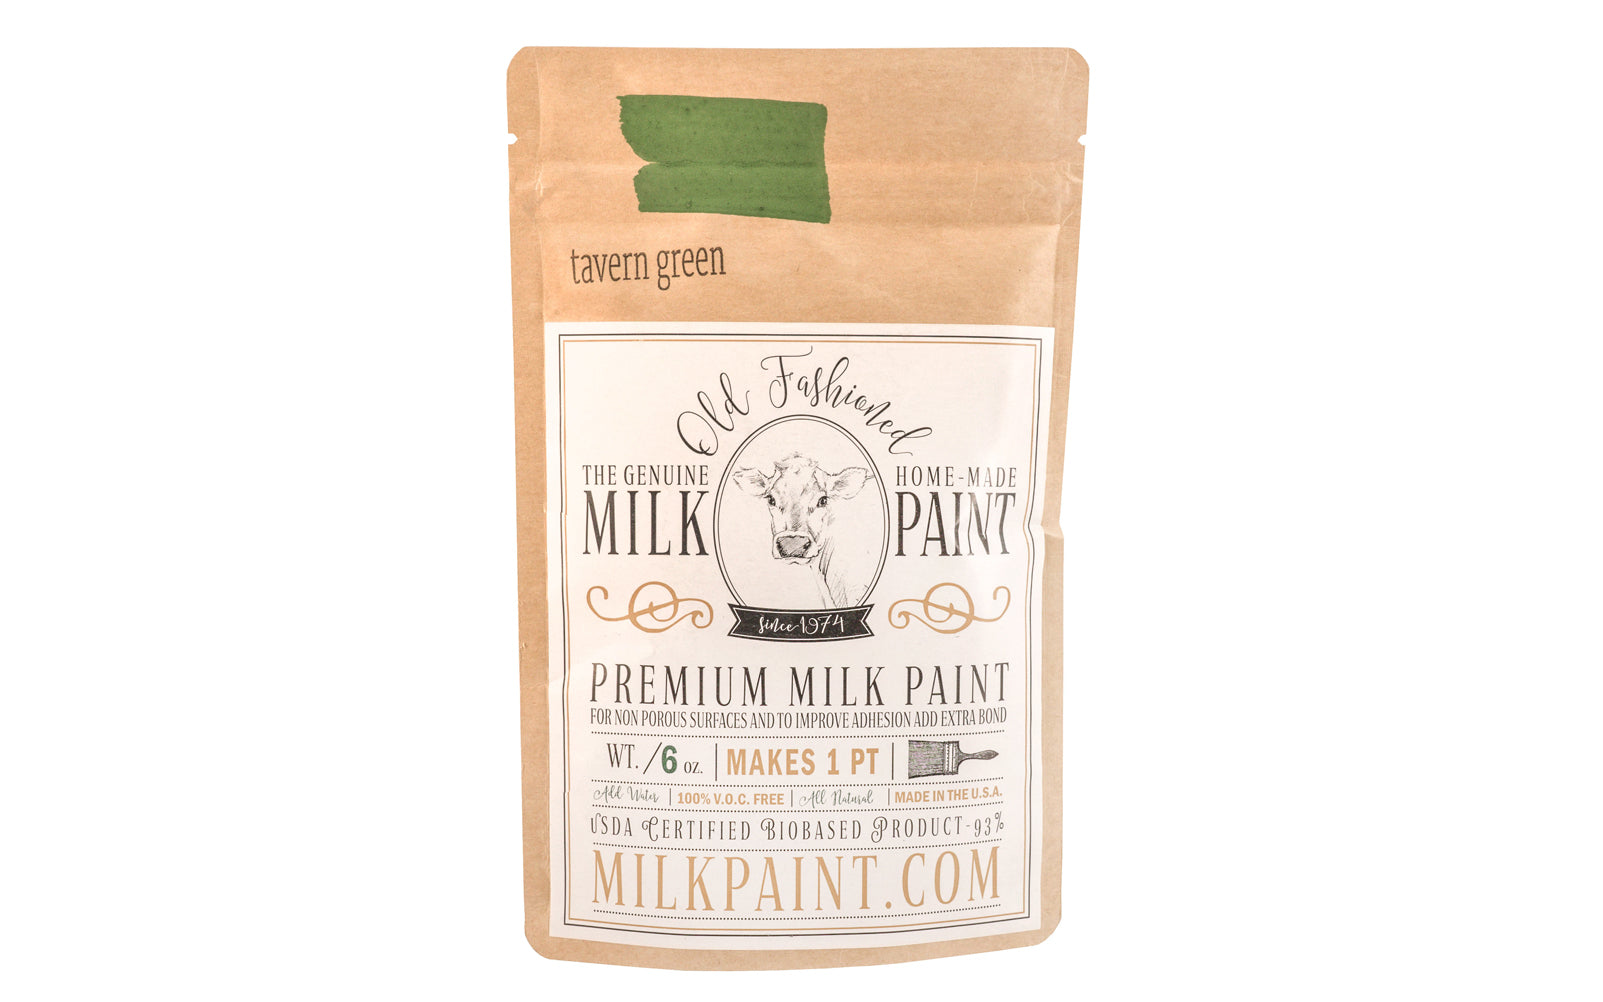 This Milk Paint color is "Tavern Green" - Dark subdued grass green. Comes in a powder form, you can control how thick/thin you mix the paint. Use it as you would regular paint, thinner for a wash/stain or thicker to create texture. Environmentally safe, non-toxic & is food safe. 100% VOC free. Powder Paint